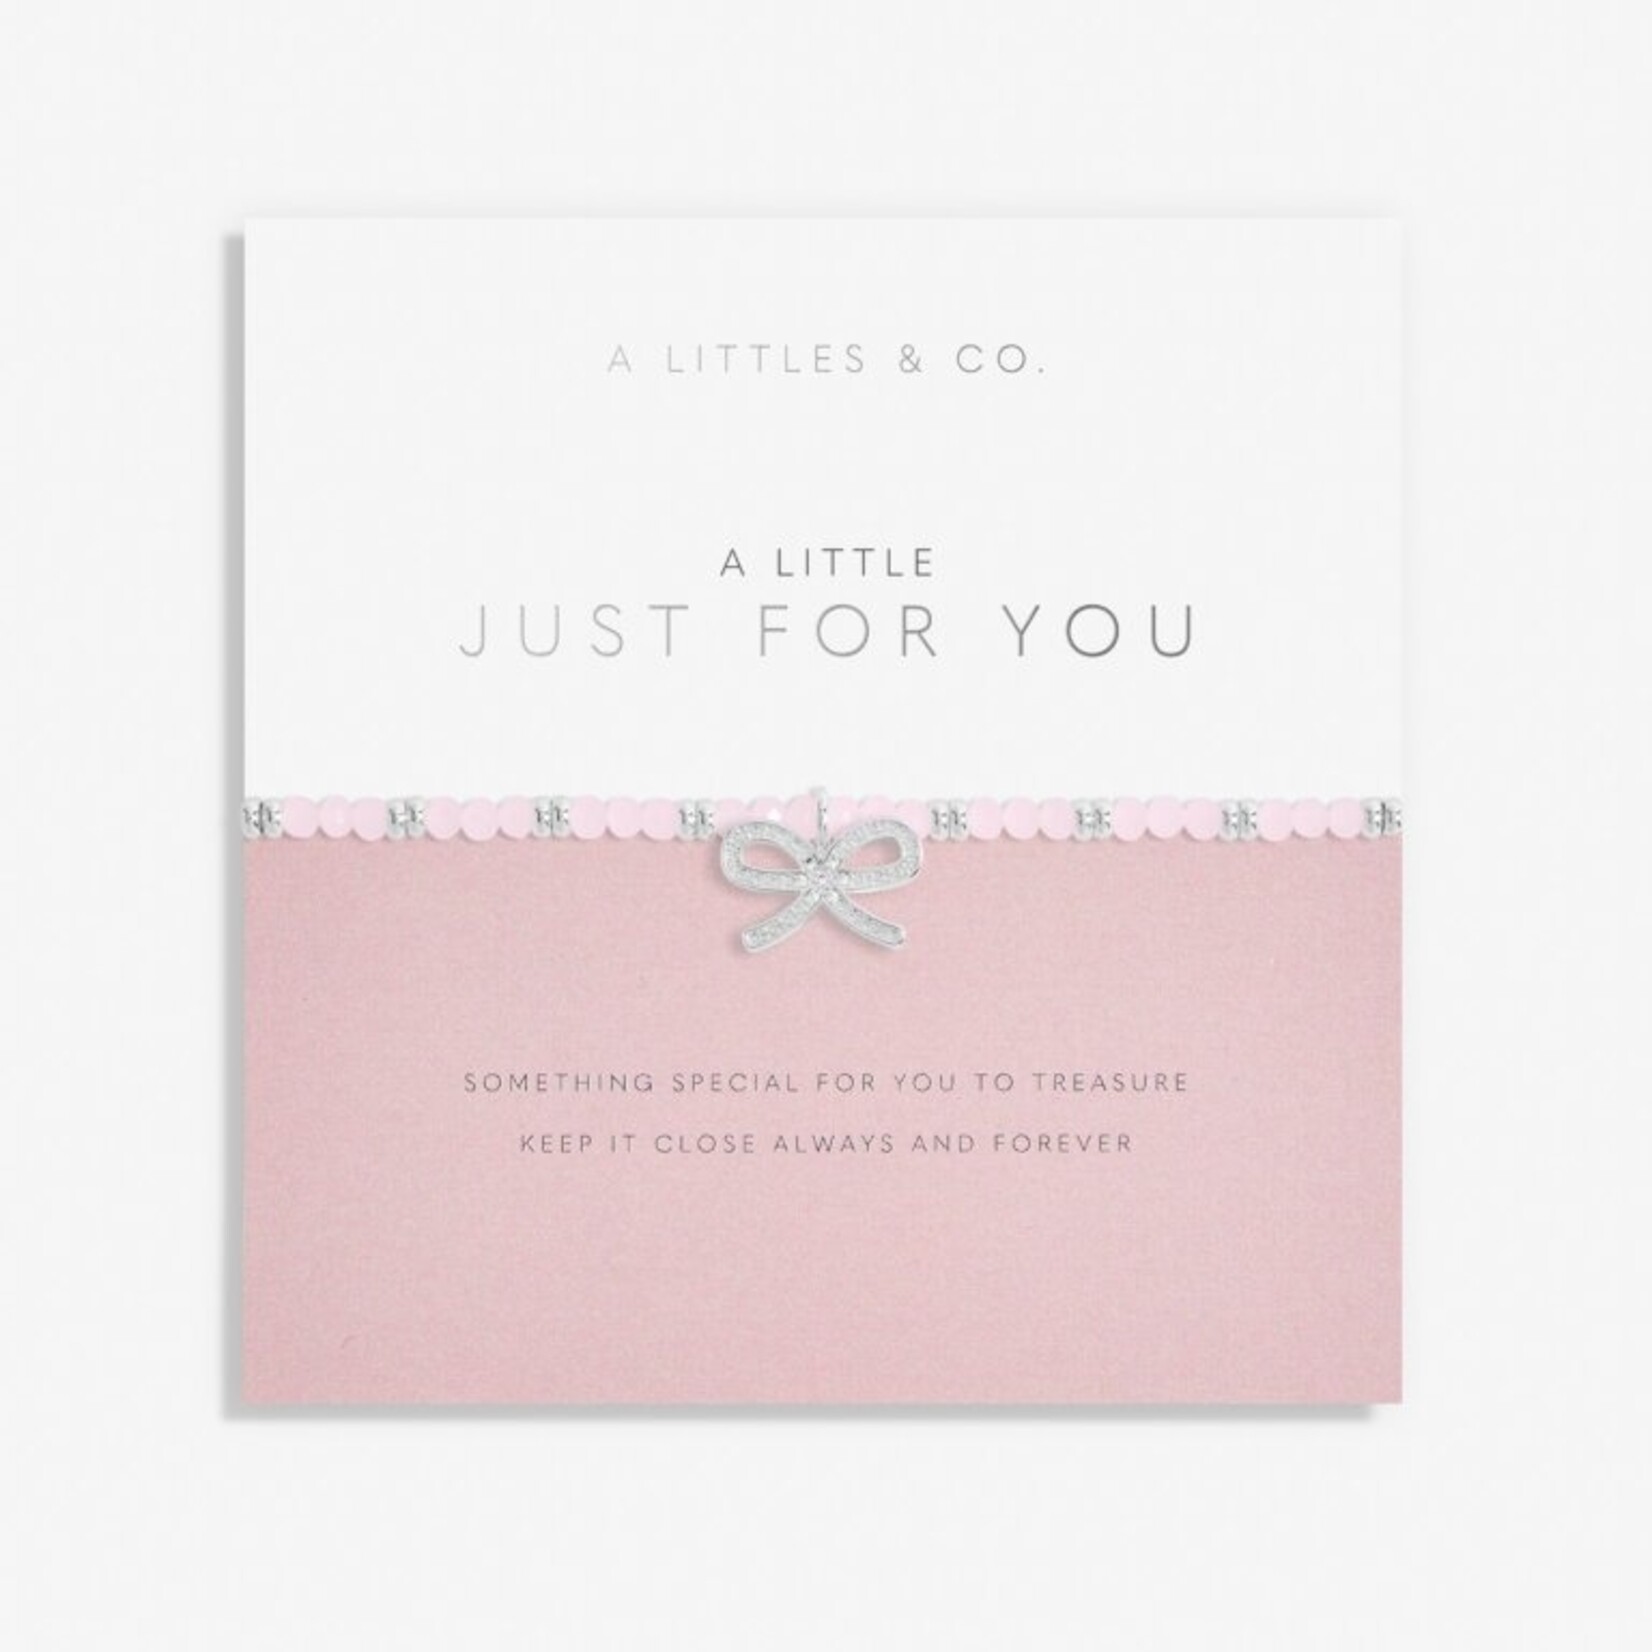 A Littles & Co A Littles & Co - Just for You Bracelet Silver